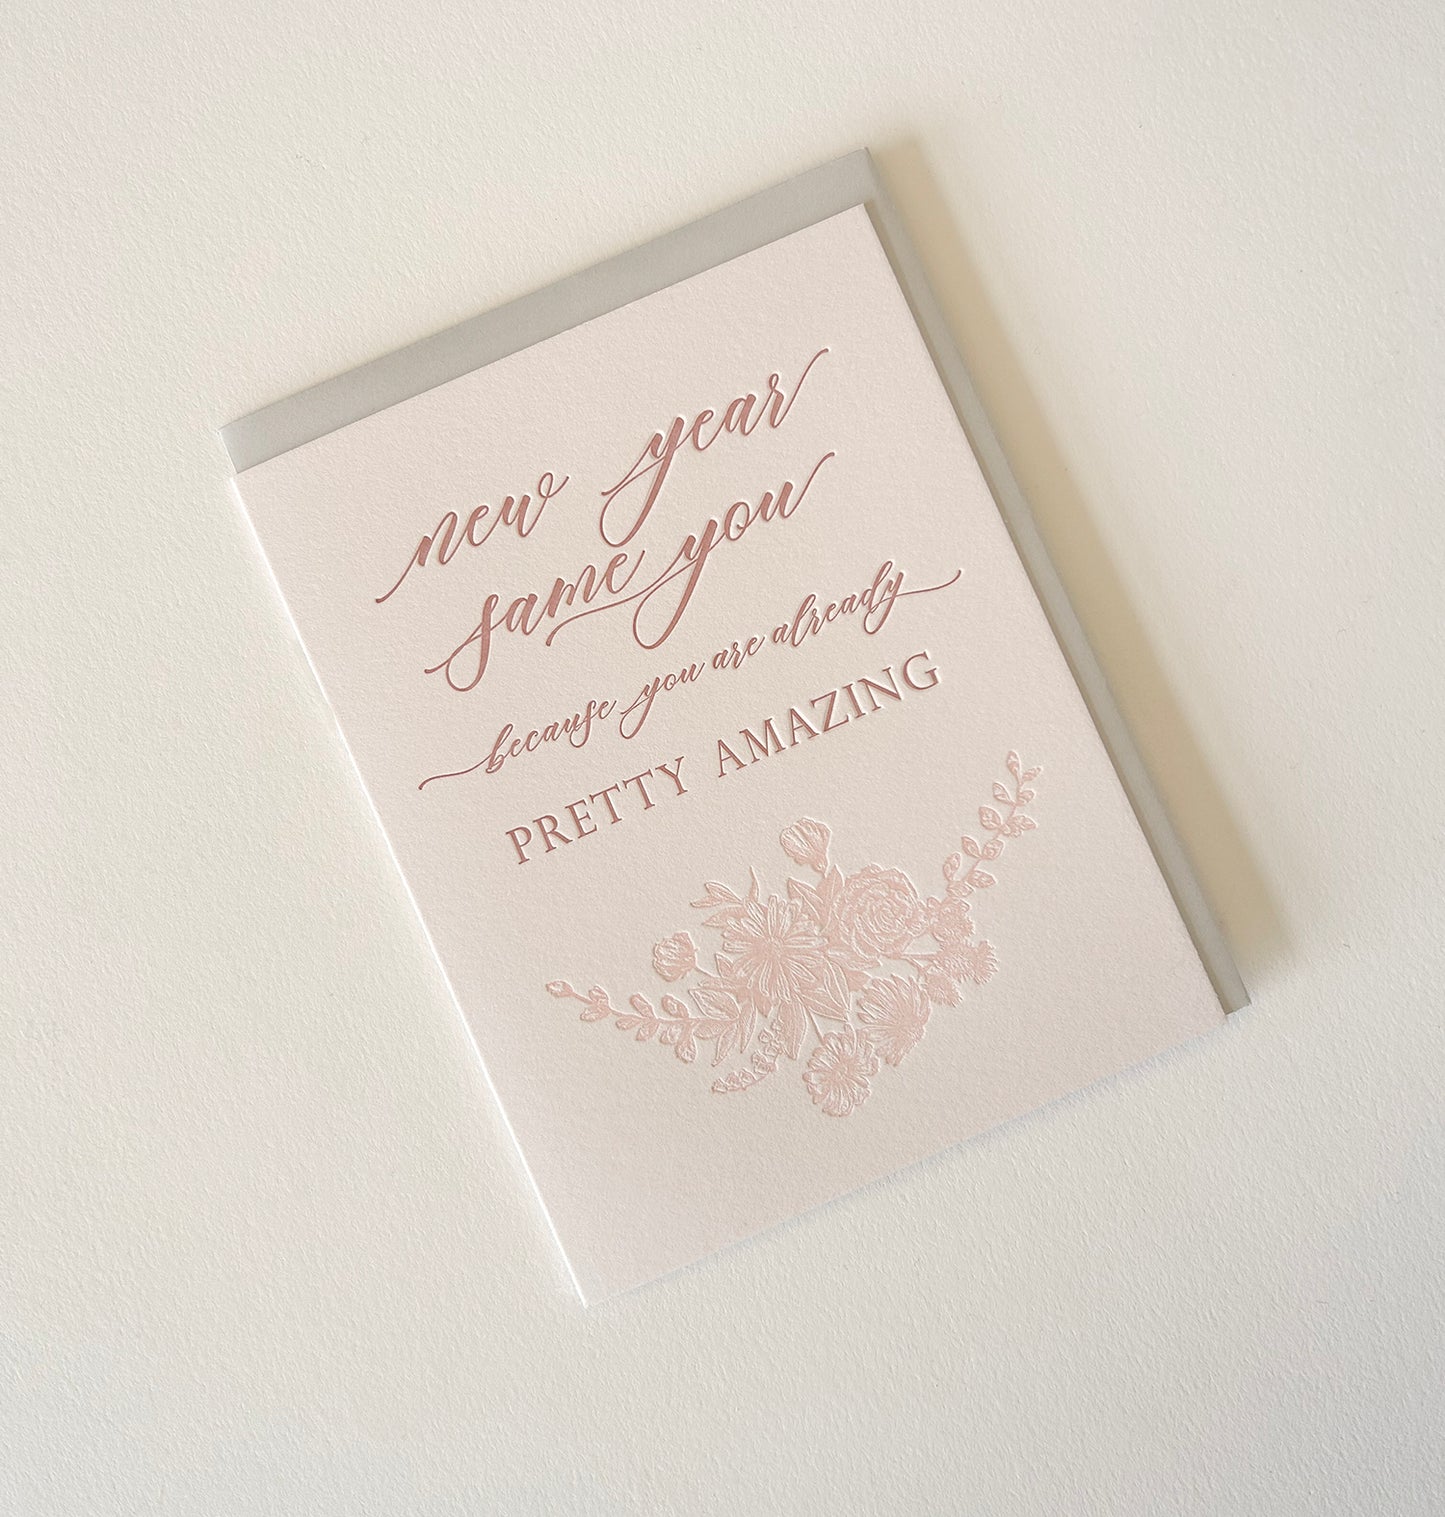 Letterpress holiday card with florals that says "New year same you because you are already pretty amazing" by Rust Belt Love